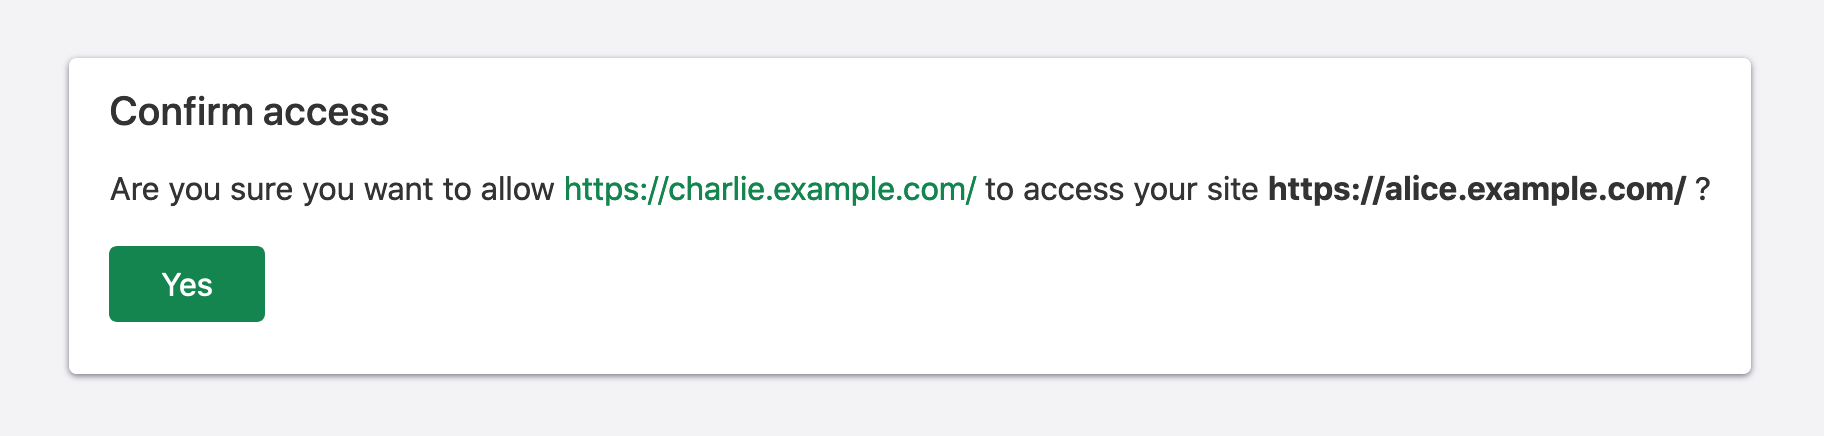 Screenshot of a web dialog asking 'Confirm access. Are you sure you want to allow https://charlie.example.com/ to access your site https://alice.example.com/ ?'